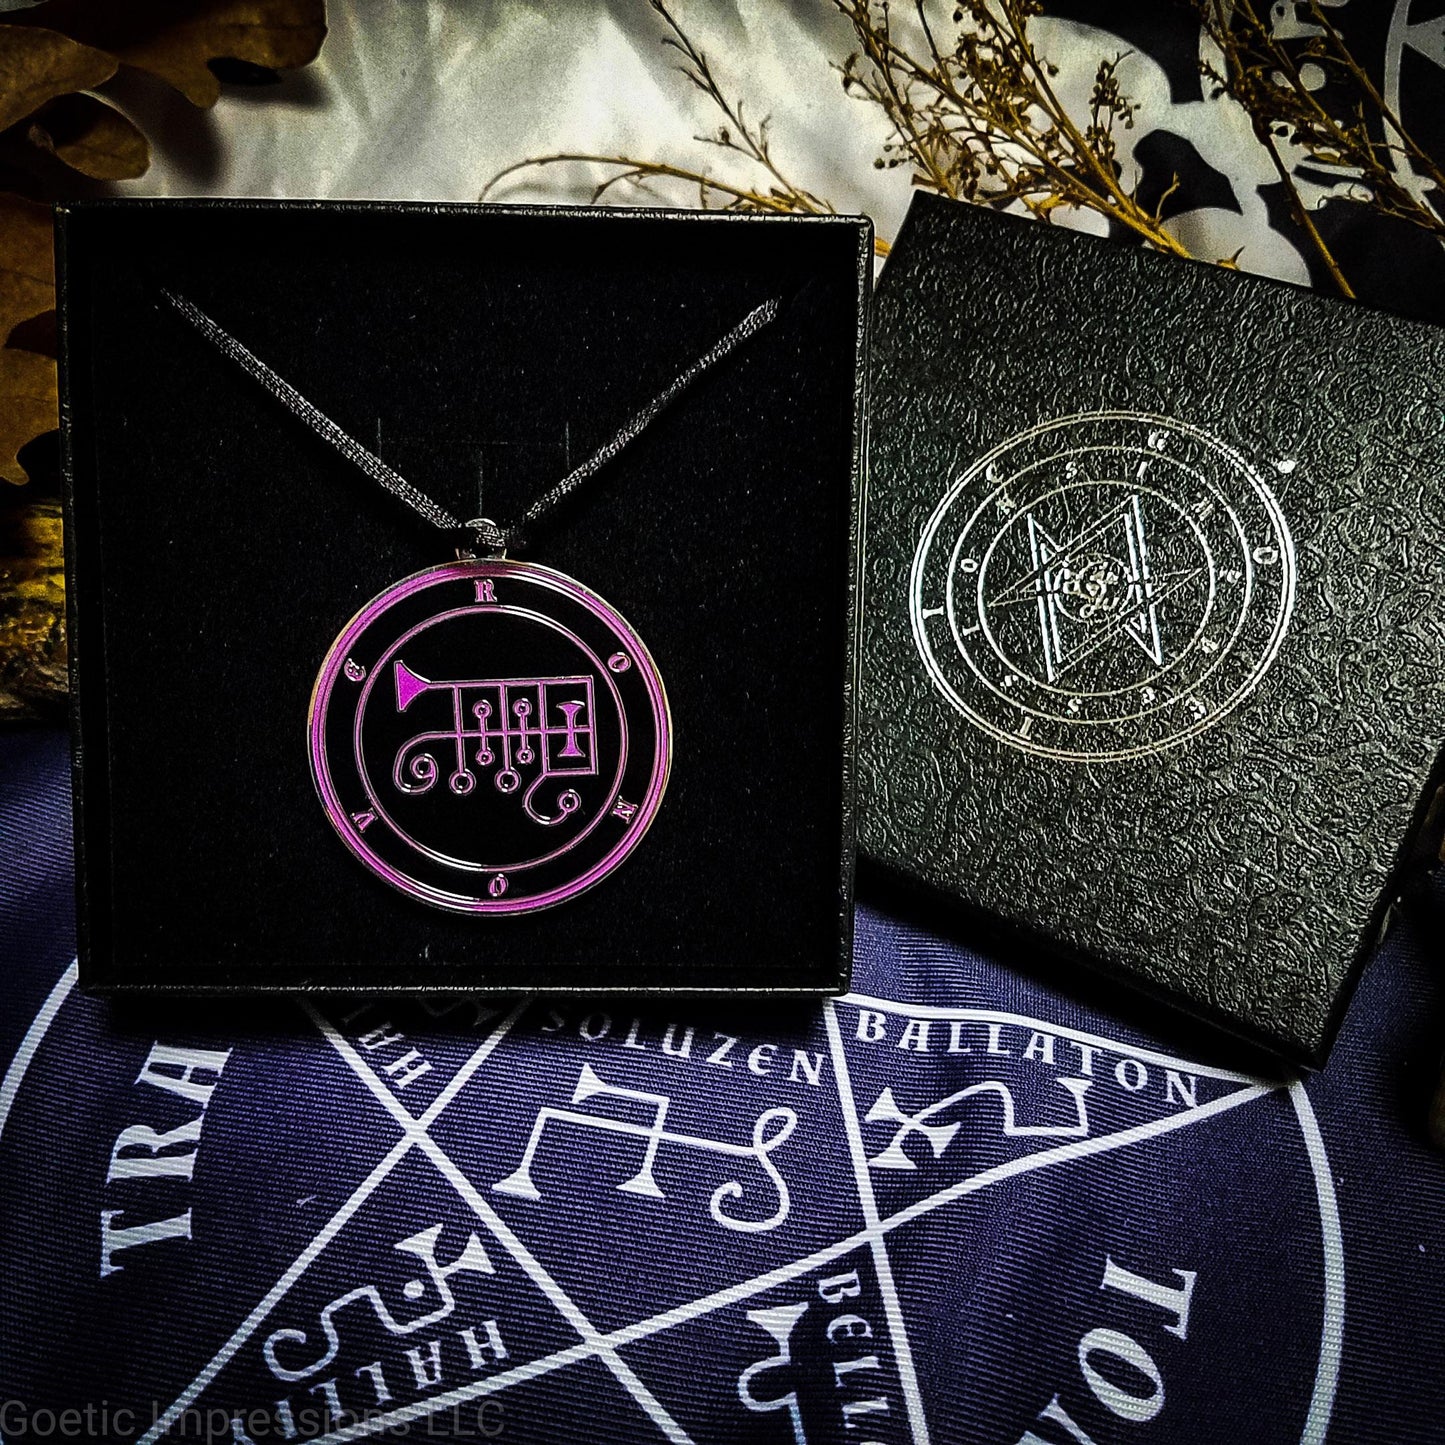 Necklace of Ronove in a Goetic Impressions gift box stamped in silver foil. The sigil for Ronove is purple. Ronove's name is surrounding the sigil with concentric circles in purple on a black background. The seal is silver plated. The box is on a purple altar cloth with the Tetragrammaton in white.